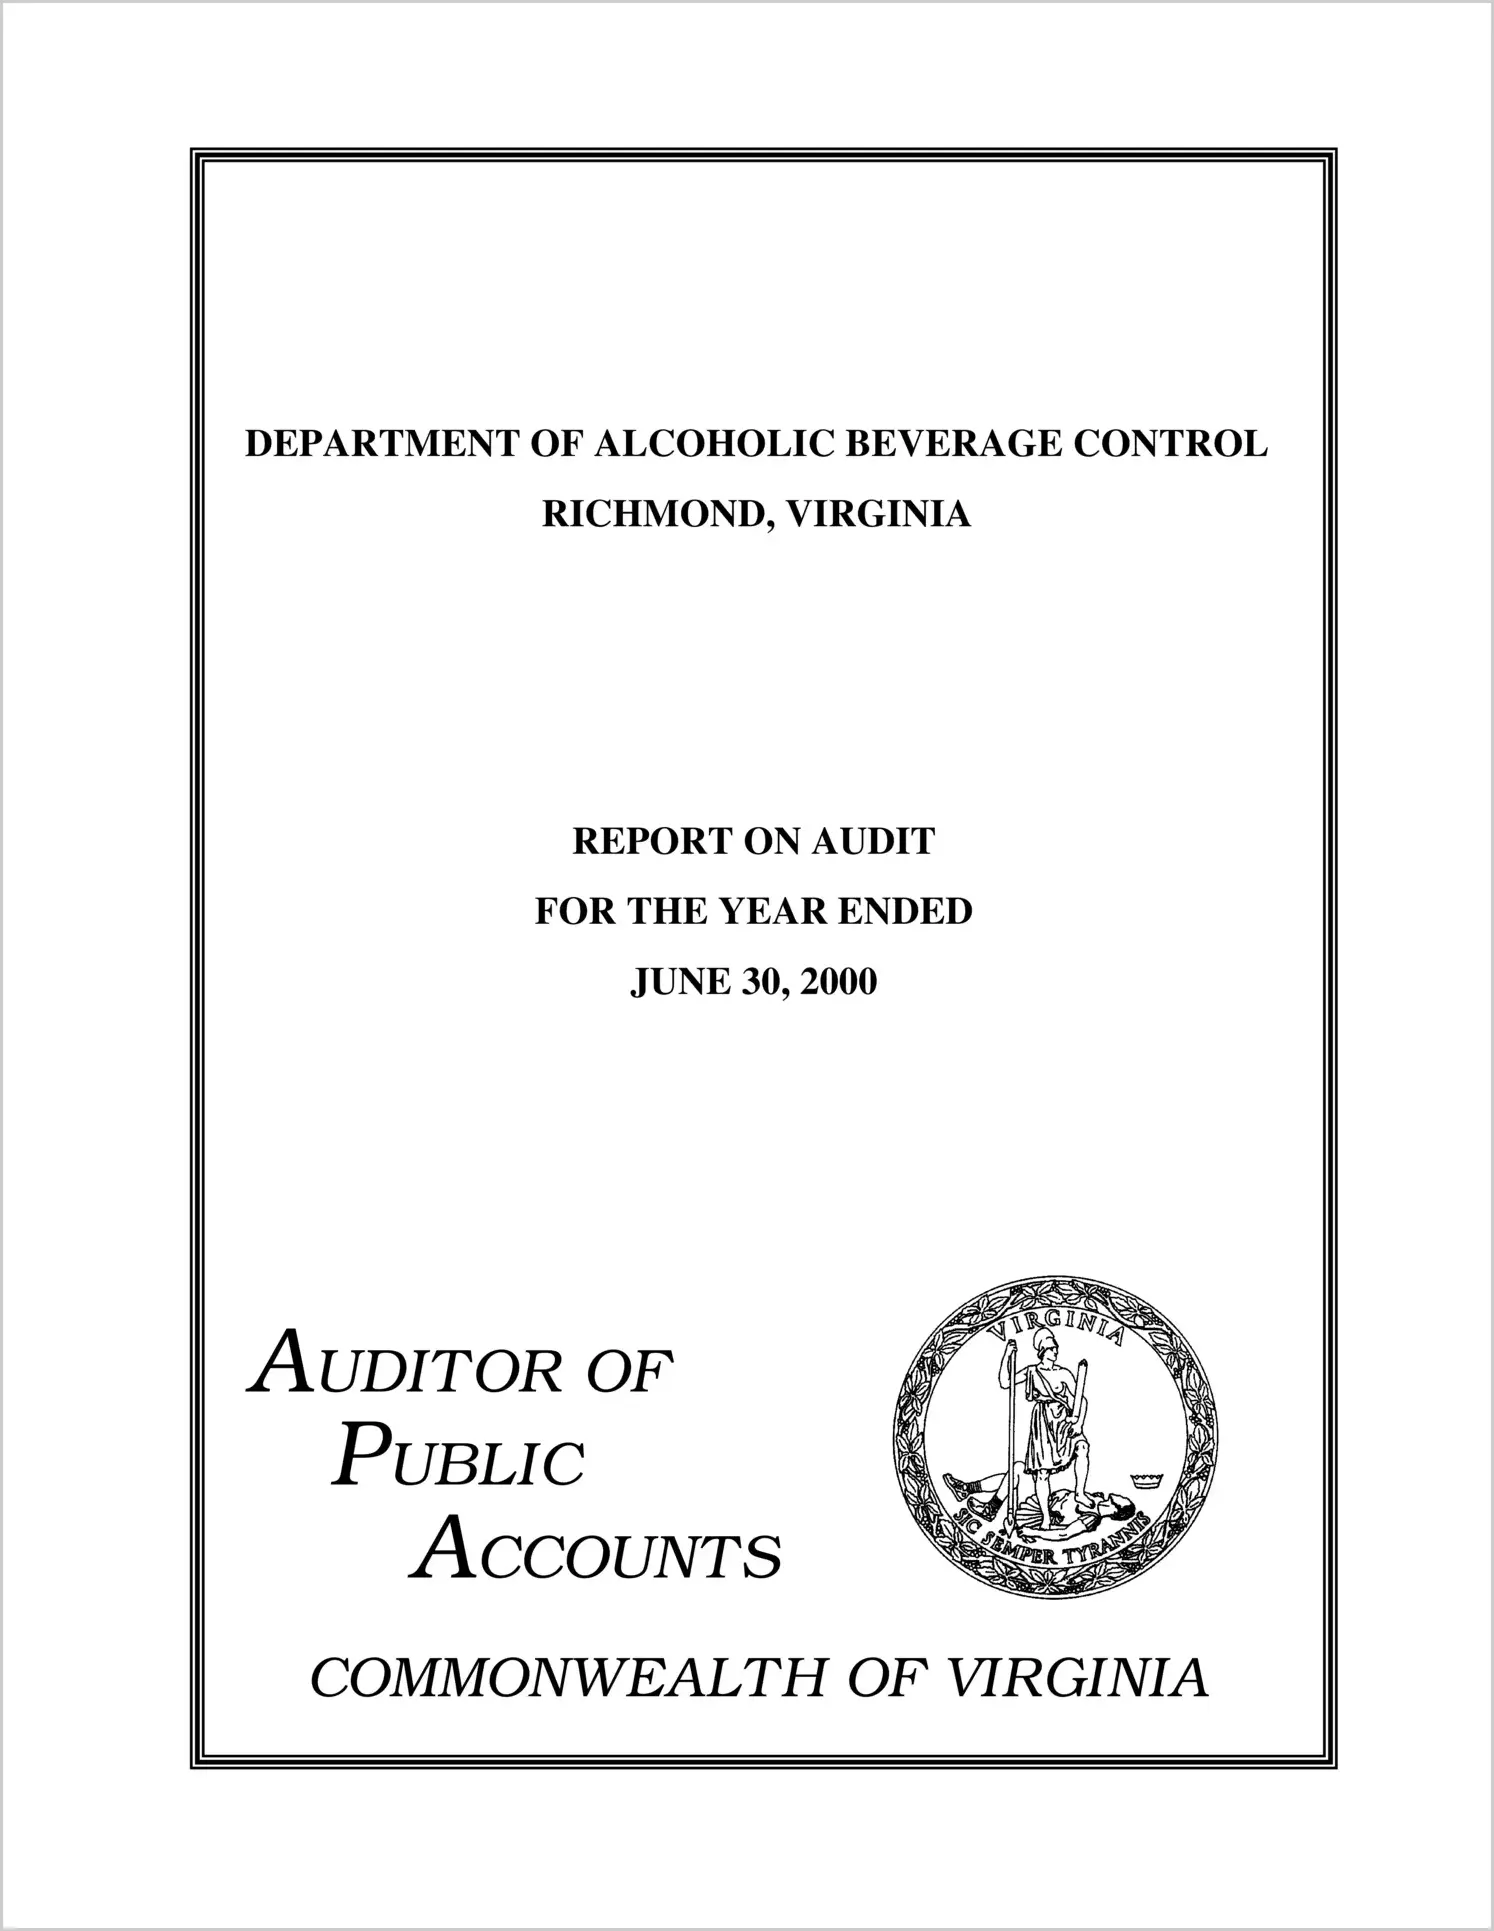 Department of Alcoholic Beverage Control for the year ended June 30, 2000